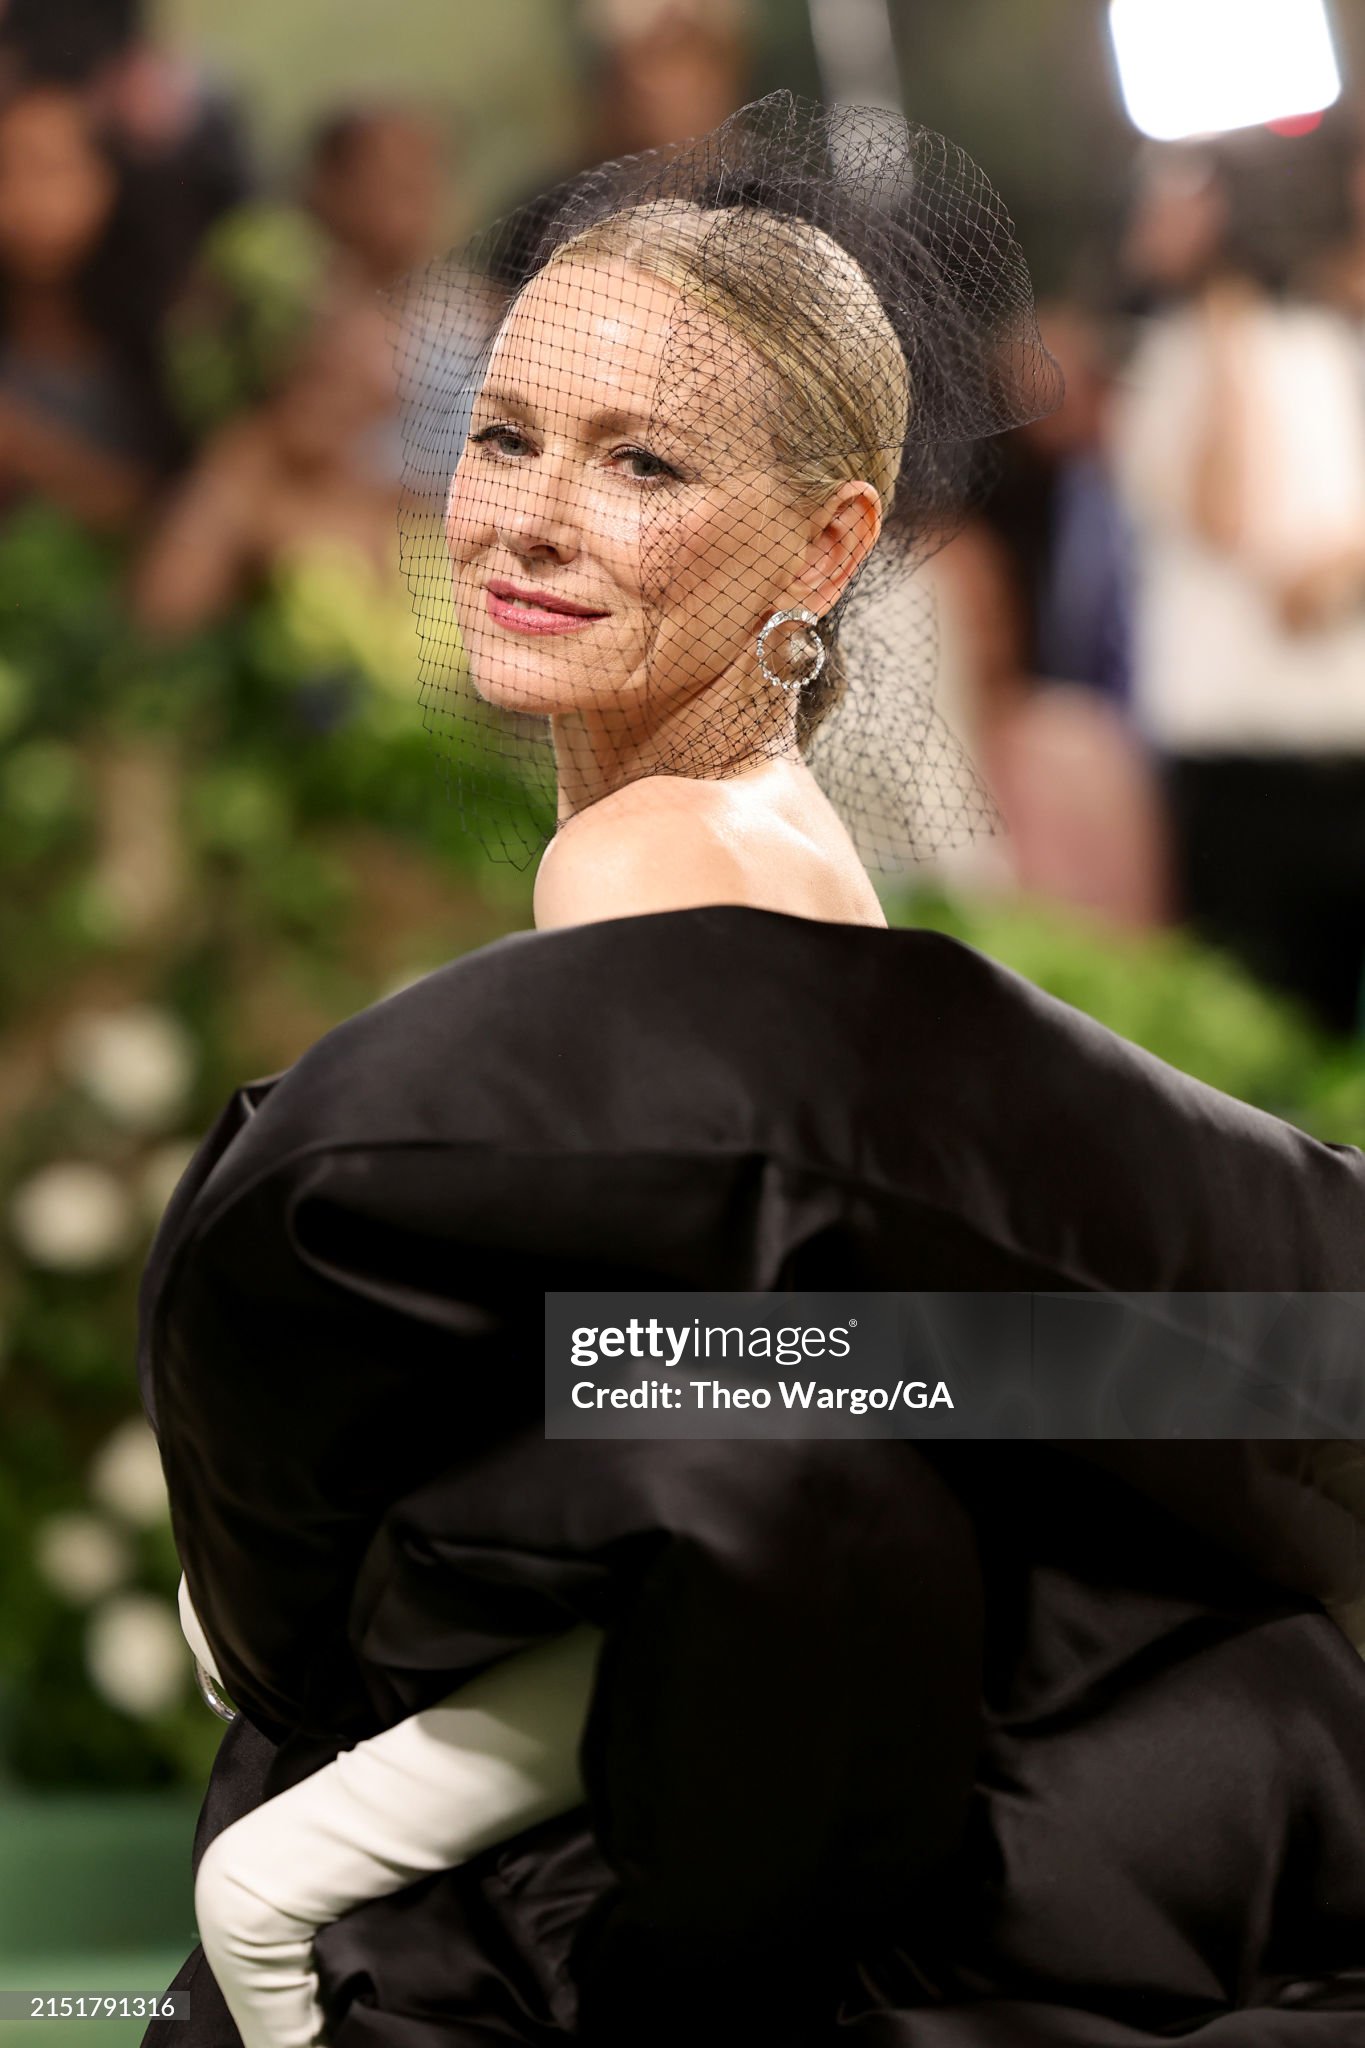 gettyimages-2151791316-2048x2048.jpg